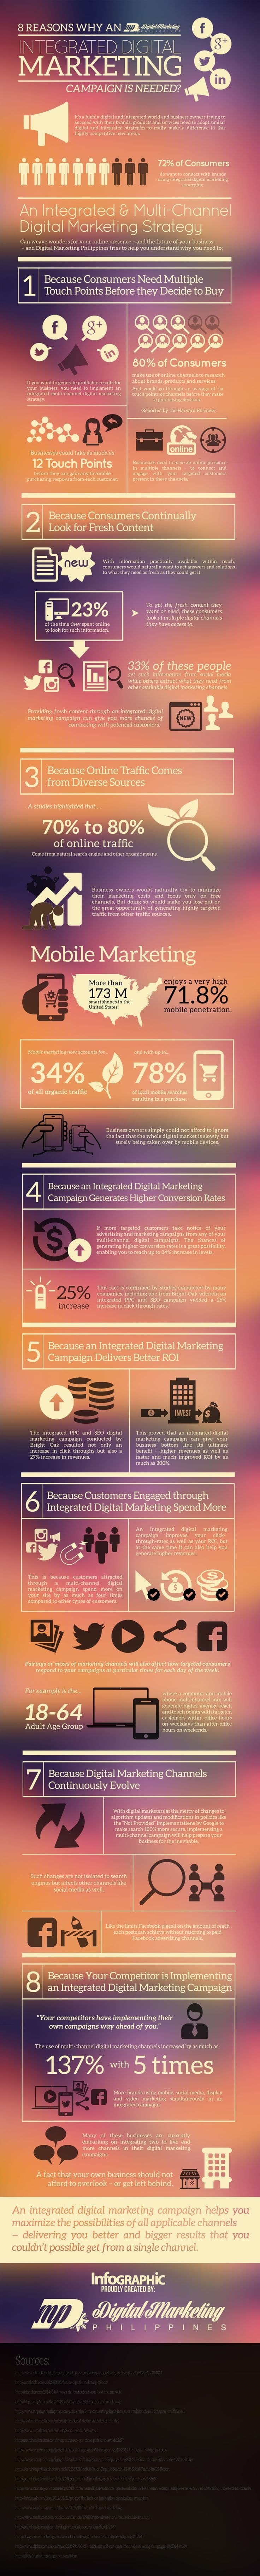 8-reasons-why-an-integrated-digital-marketing-campaign-is-needed